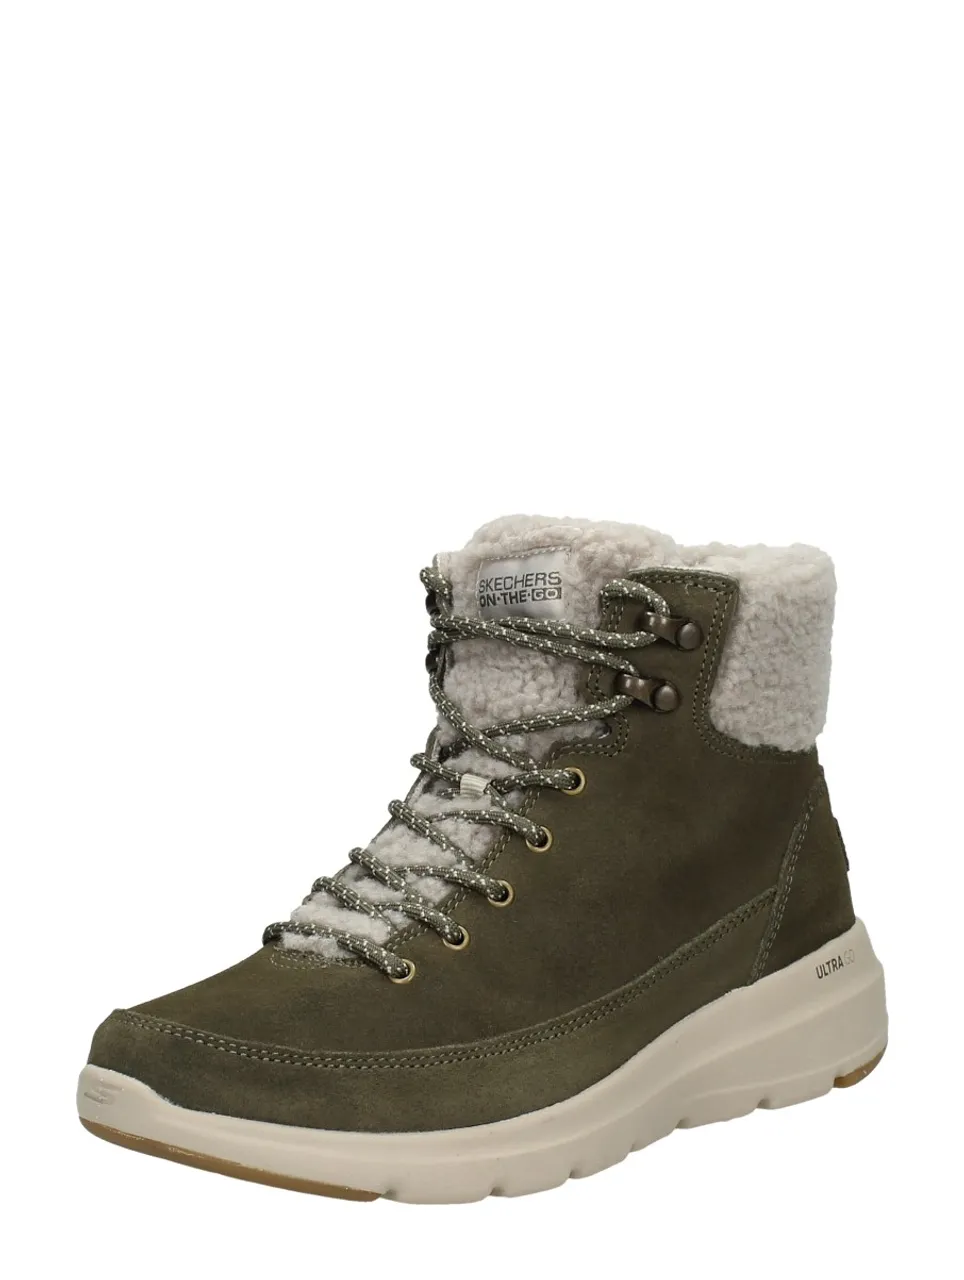 Skechers - On-the-go Glacial Ultra - Woodland